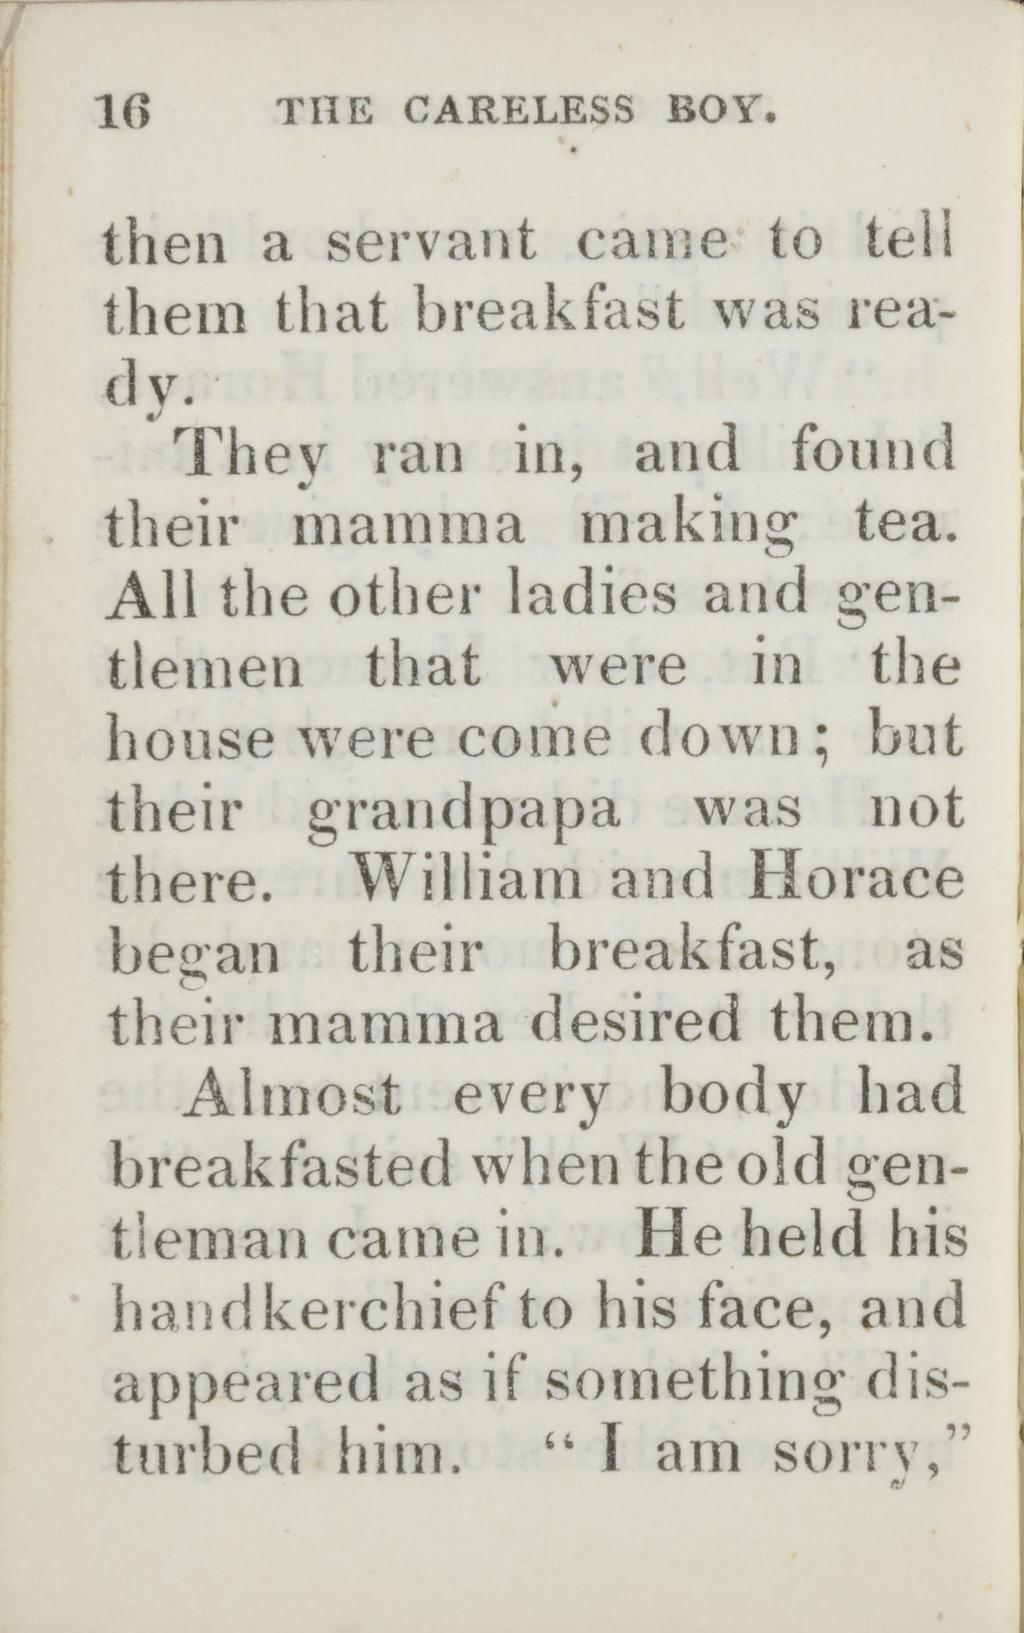 16 THE CARELESS BOY. then a servant came to tell them that breakfast was ready. They ran in, and found their mamma making tea.